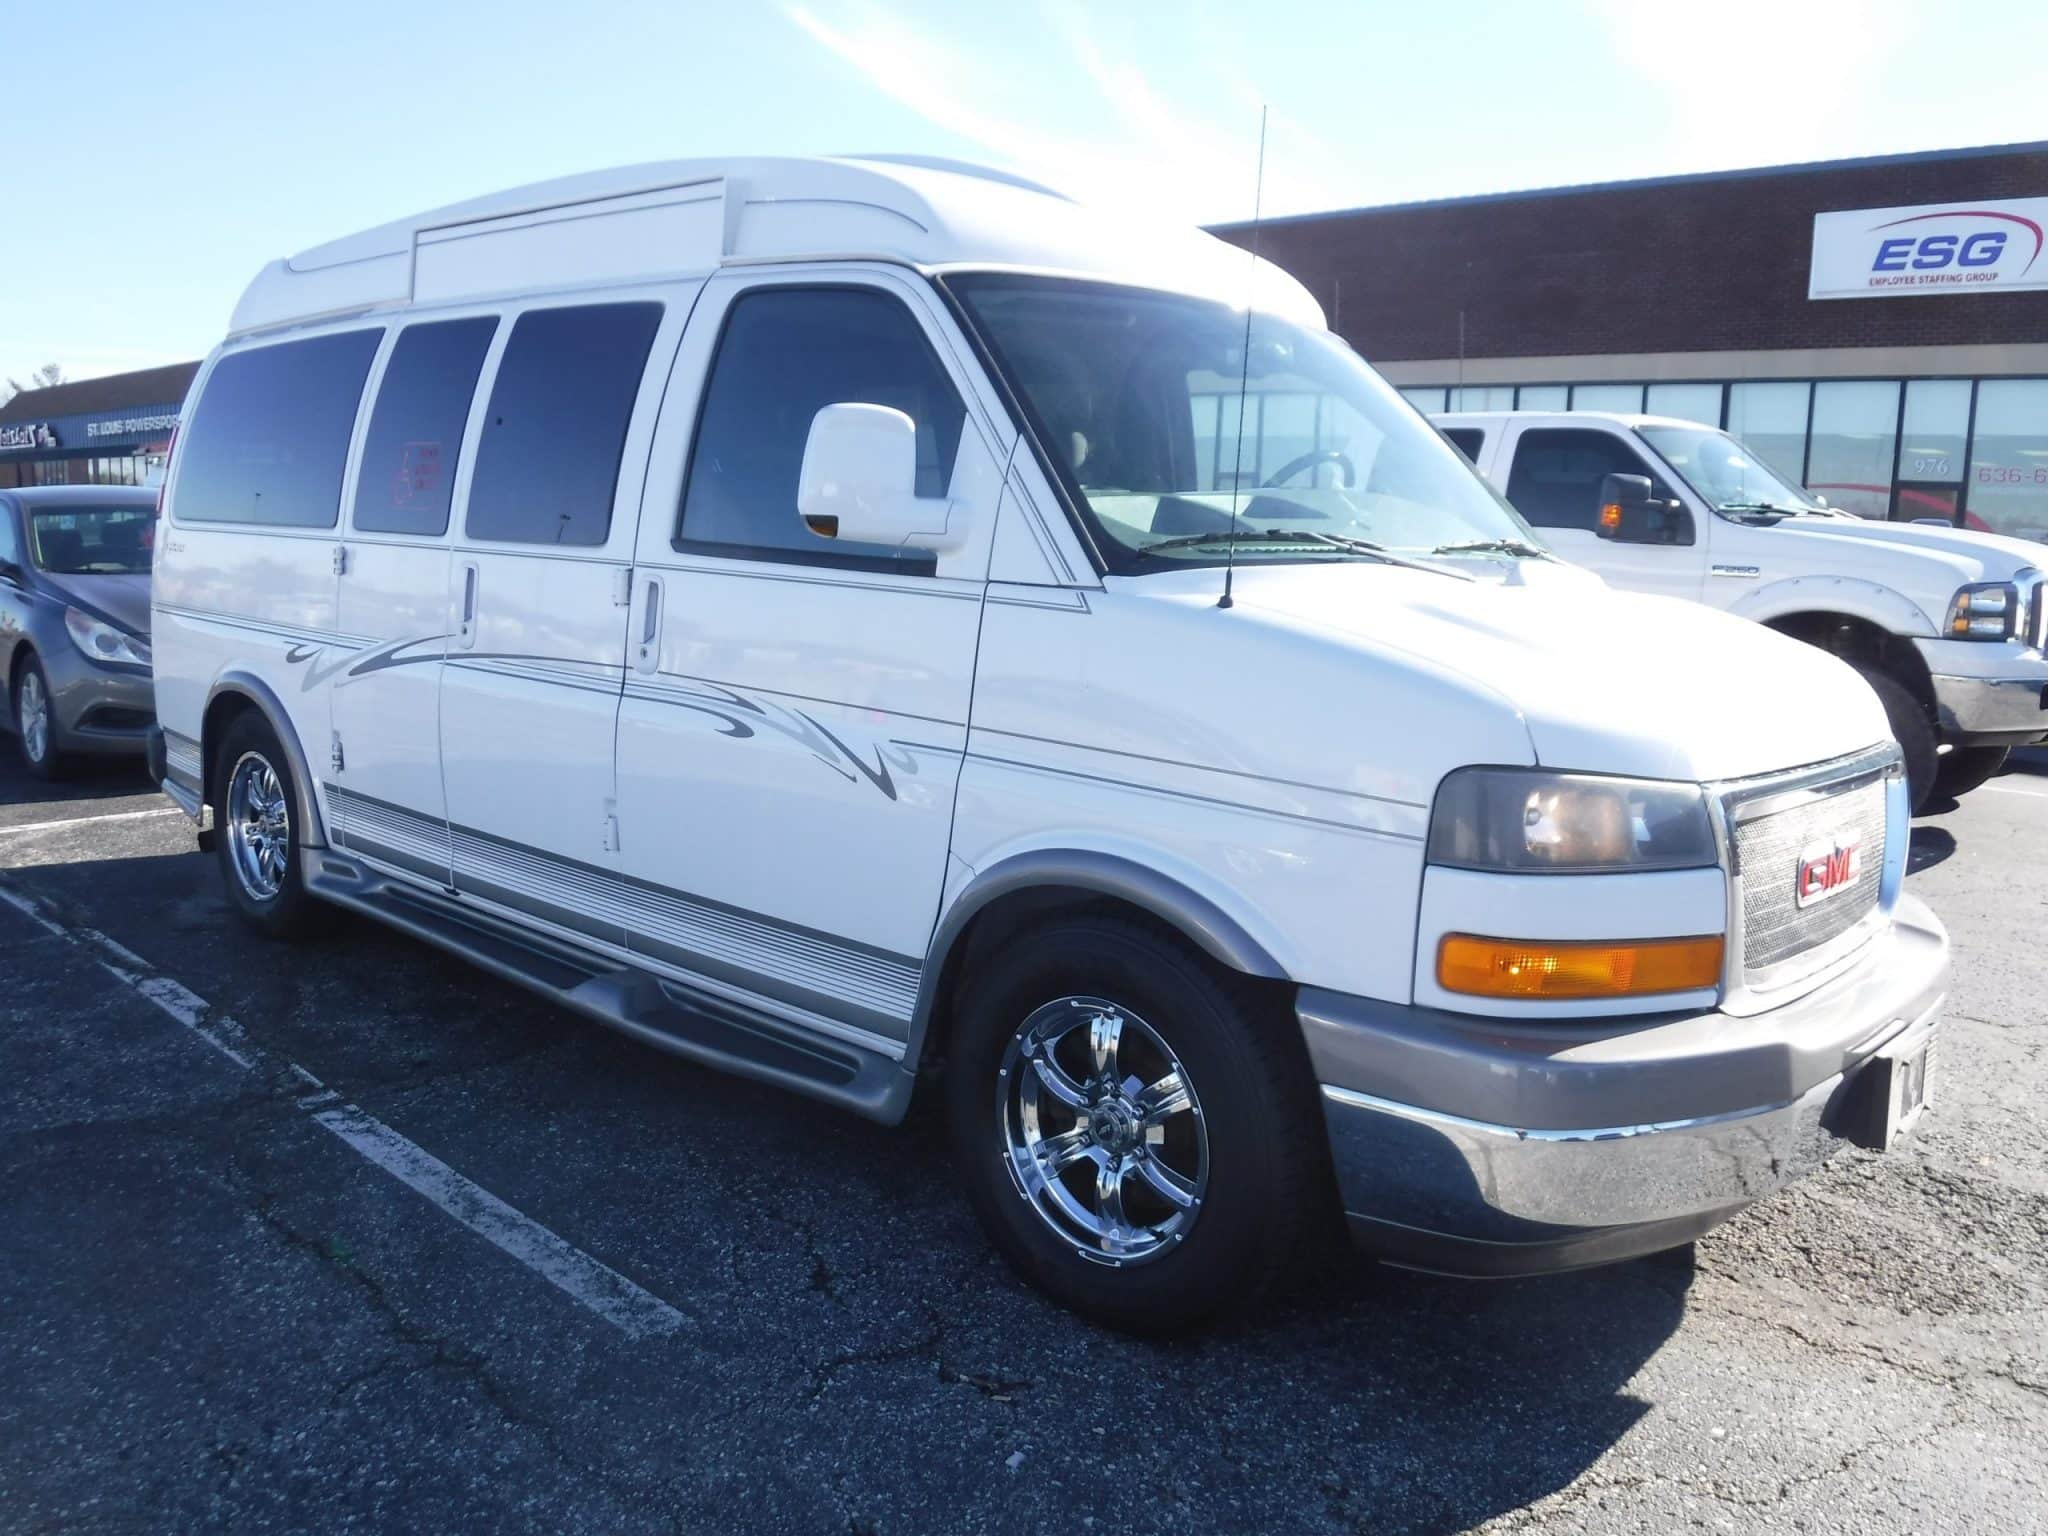 Used Van Pre-Purchase Inspection